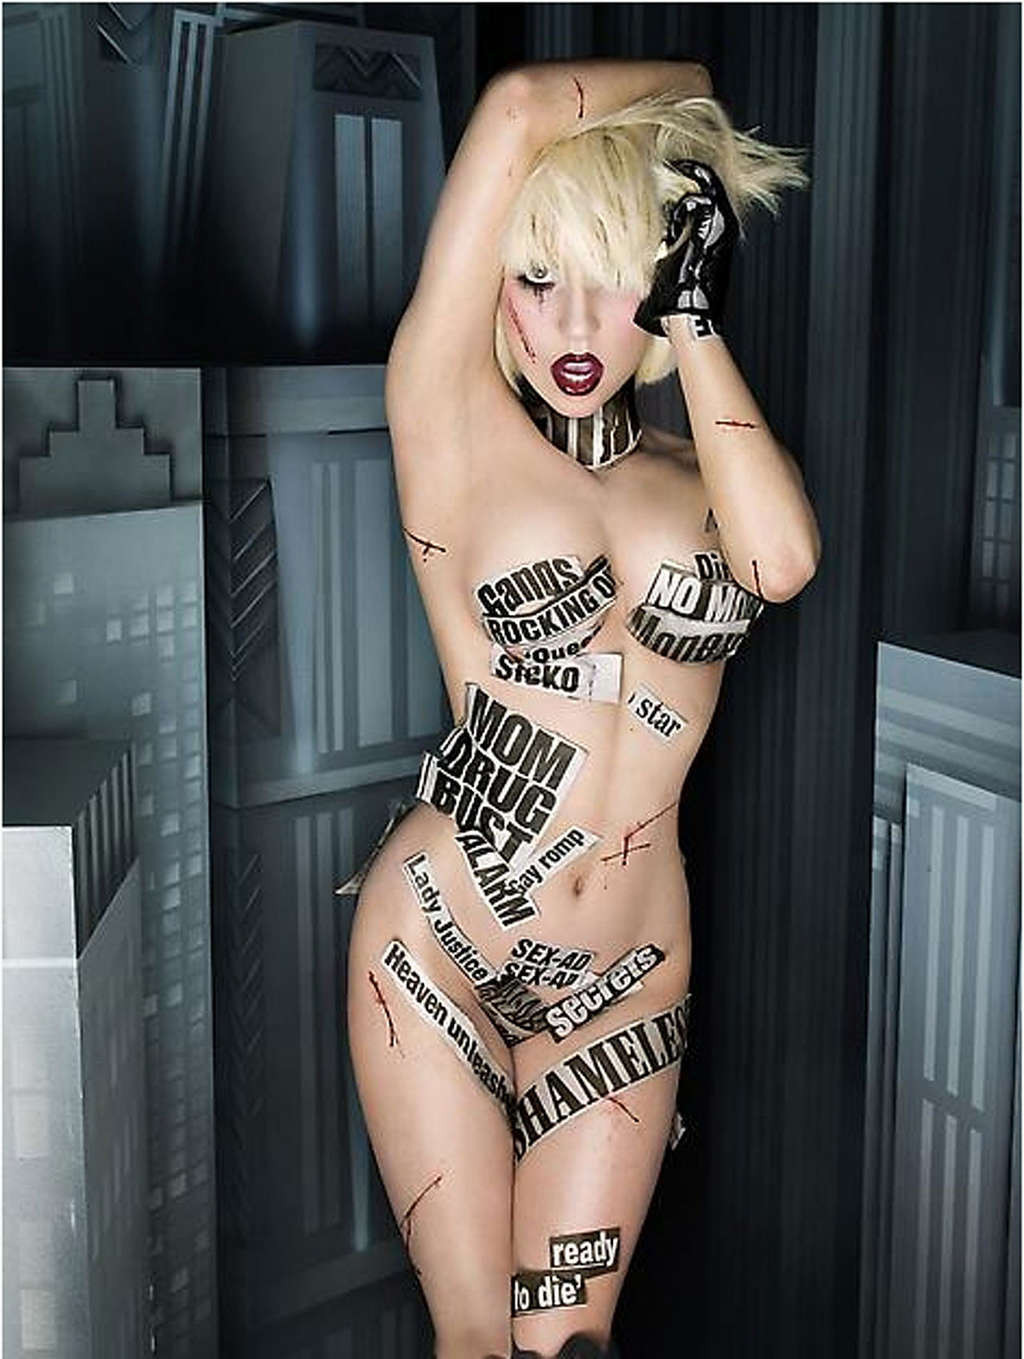 Lady Gaga posing all nude for some magazine and tits slip on stage paparazzi pic #75368546